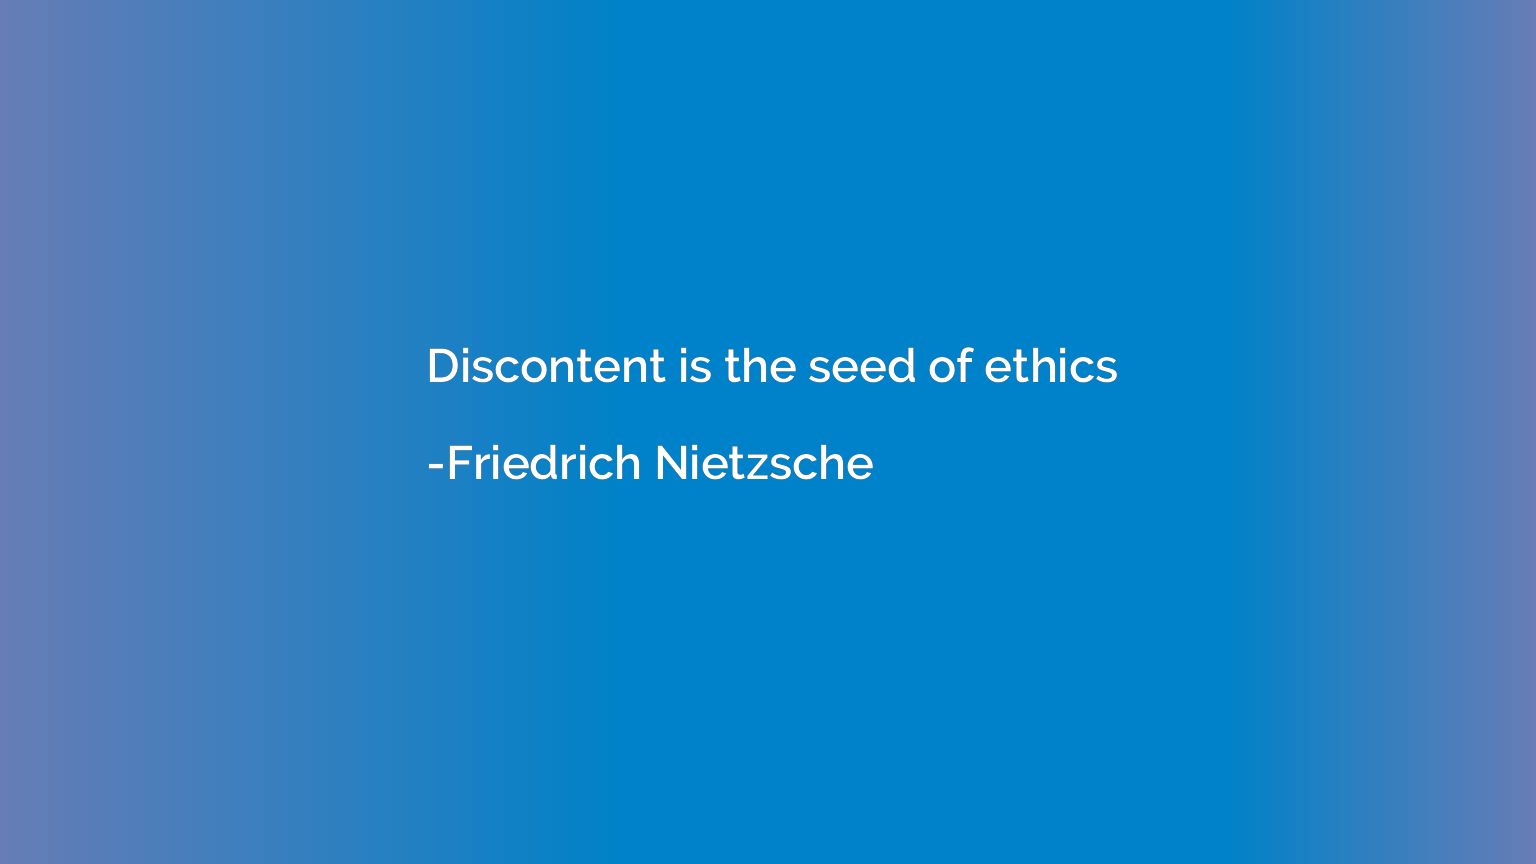 Discontent is the seed of ethics